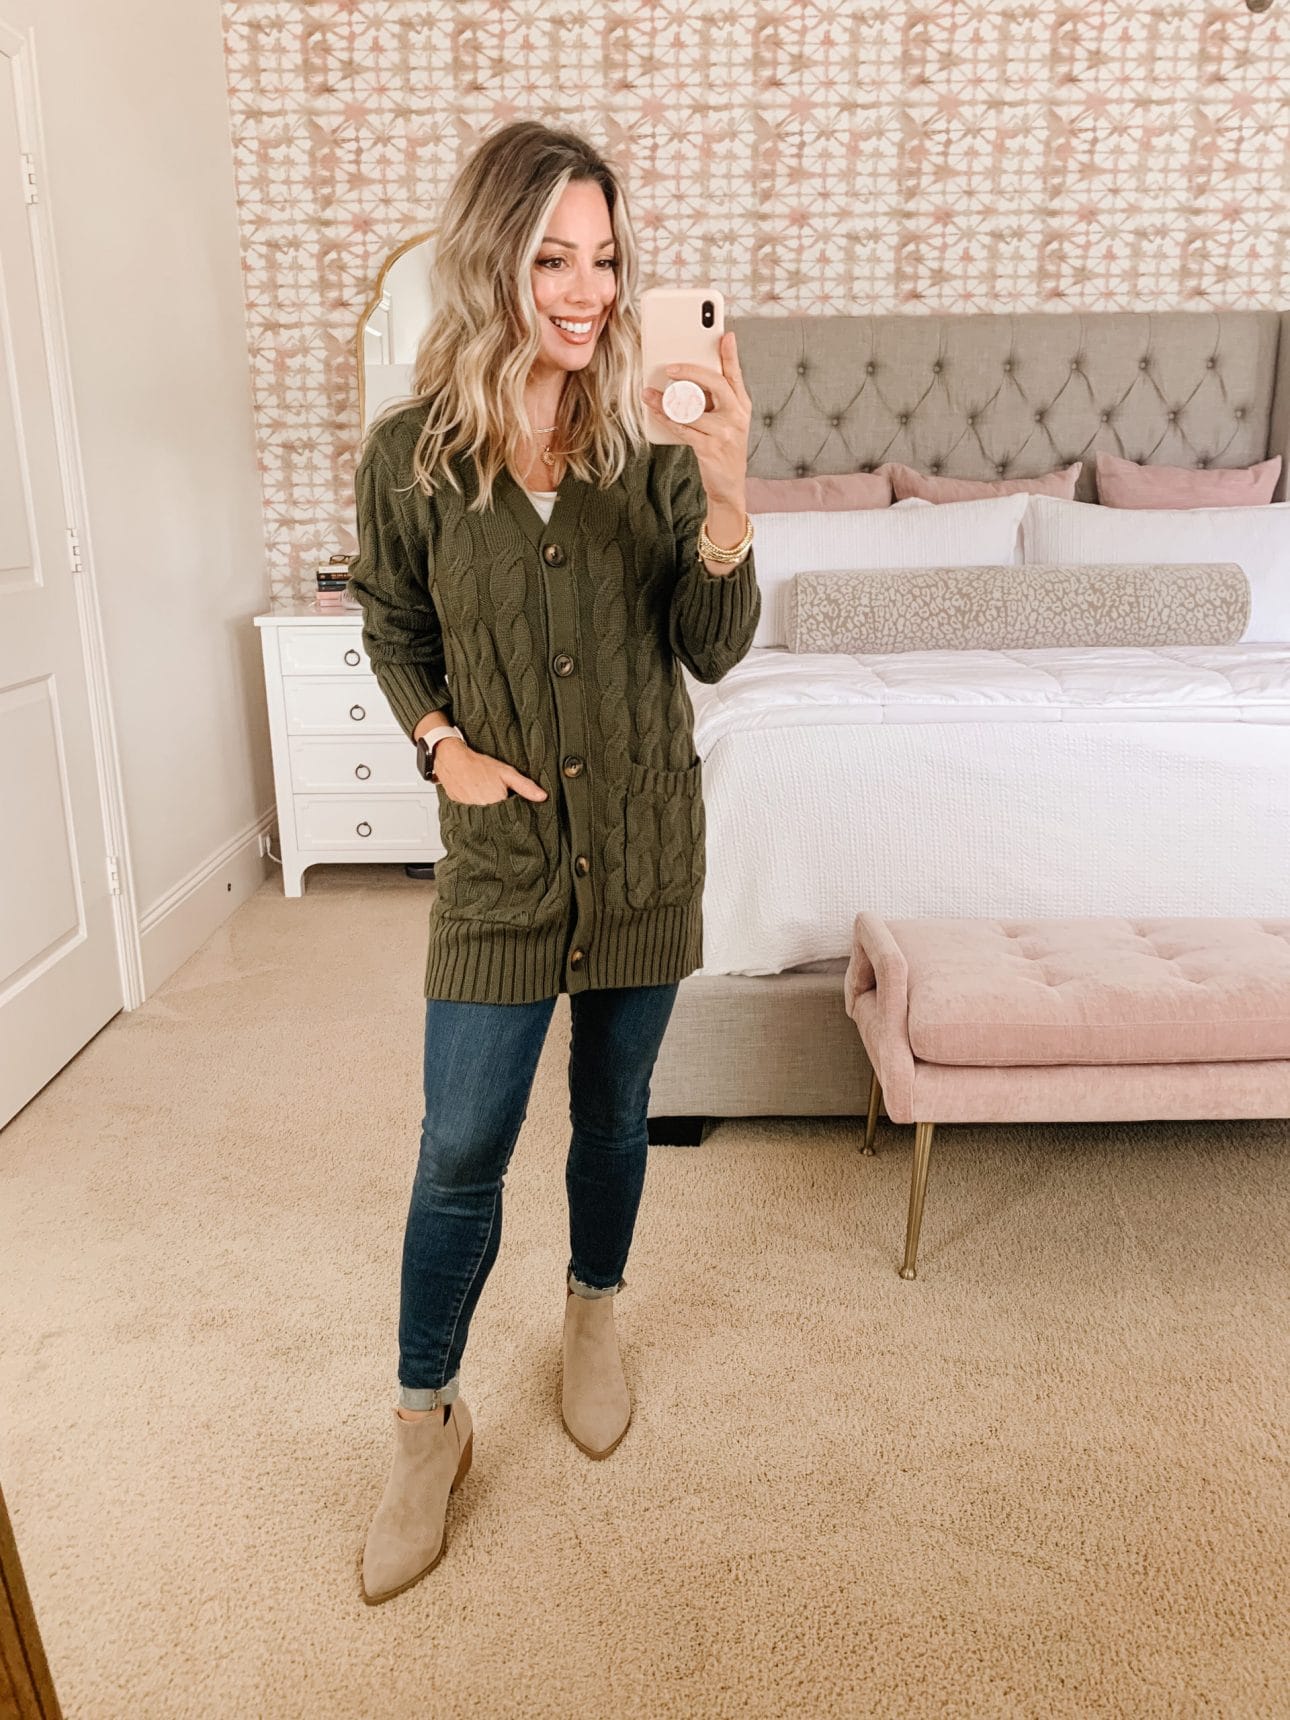 Amazon Fashion, Olive Cardigan, Jeans, Booties 